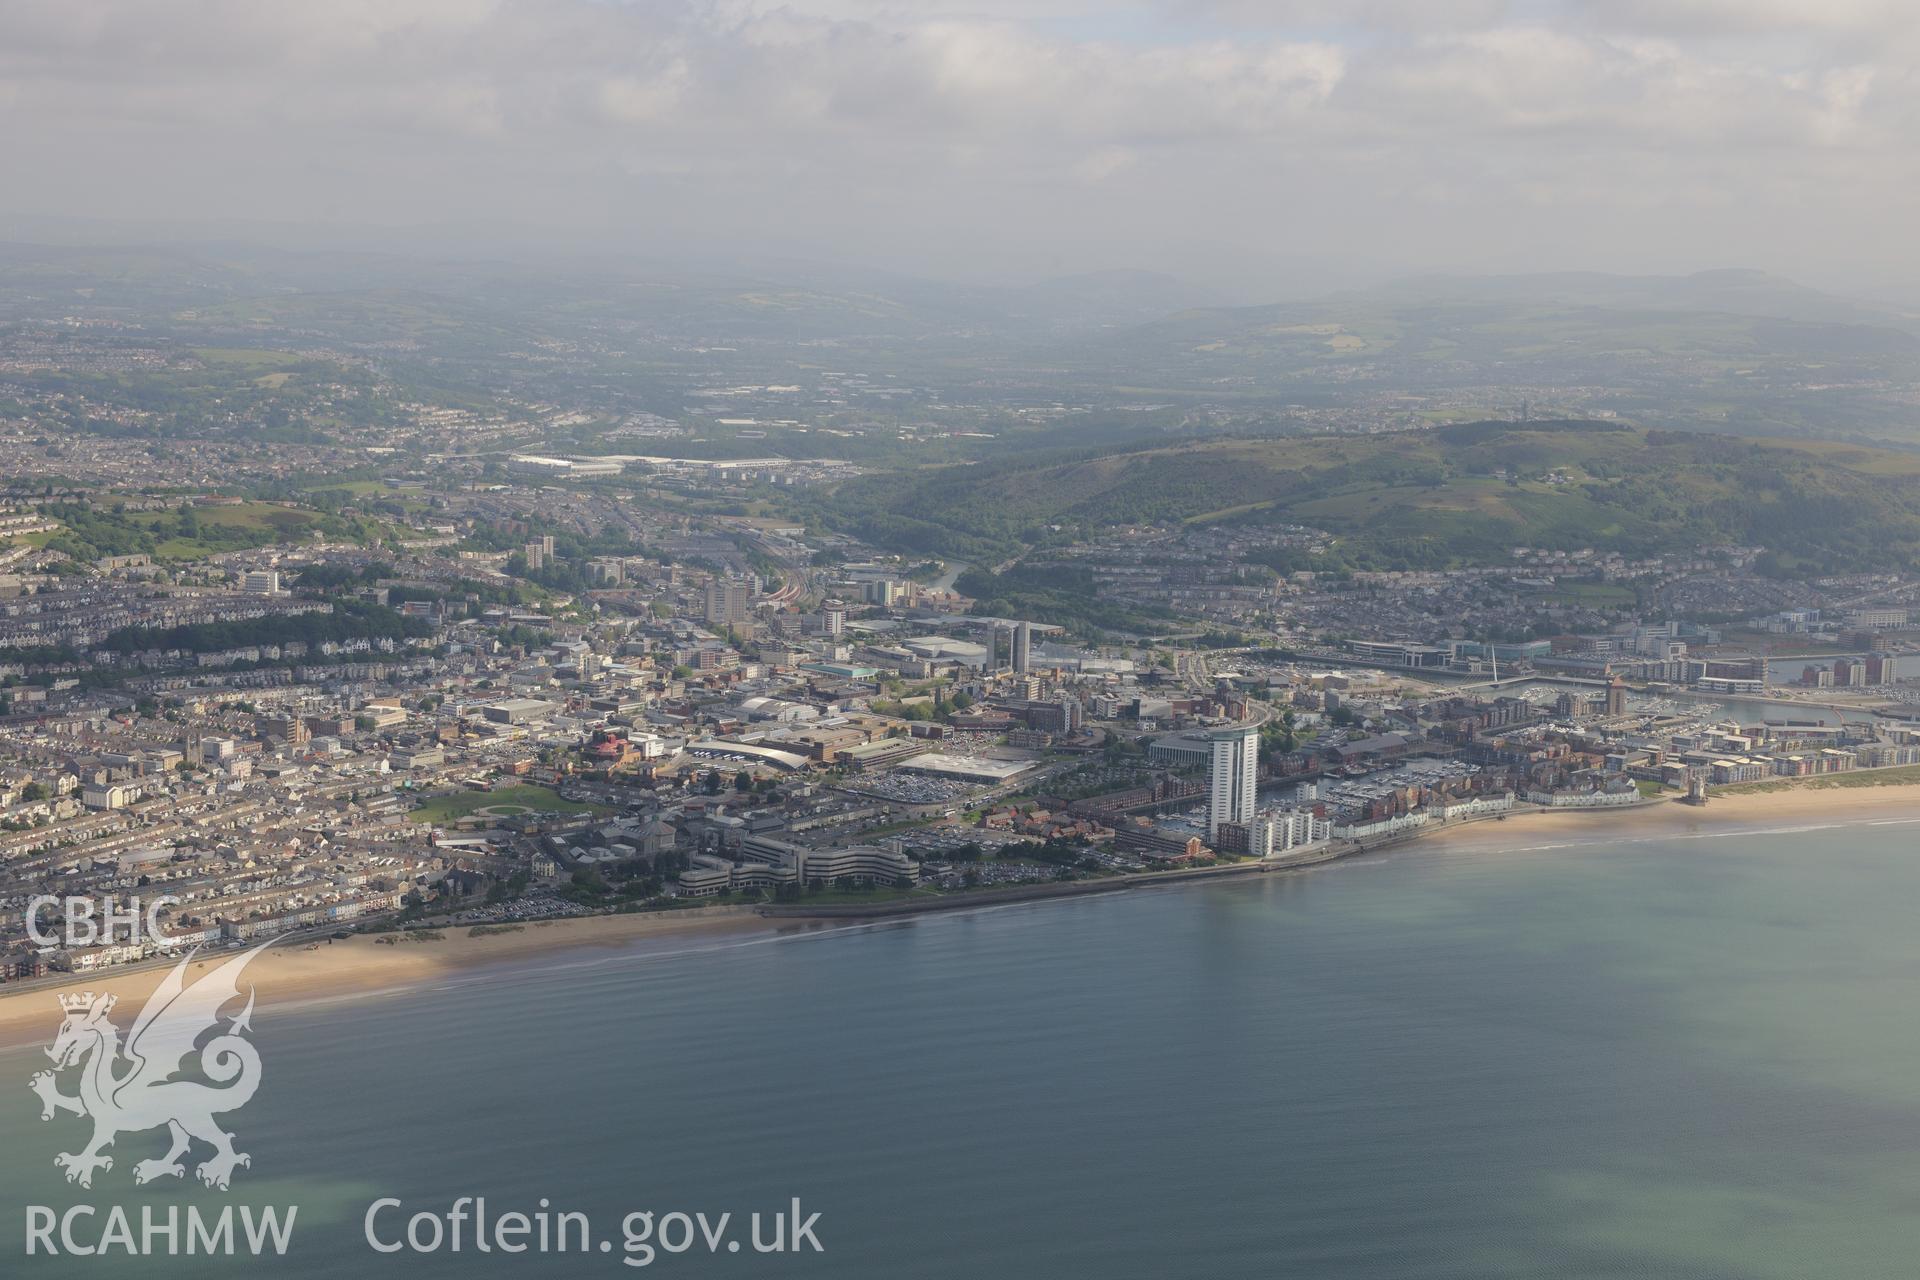 Views of Swansea prison, County Hall, Meridian Quay and south dock, Swansea, taken from Swansea Bay. Oblique aerial photograph taken during the Royal Commission's programme of archaeological aerial reconnaissance by Toby Driver on 19th June 2015.